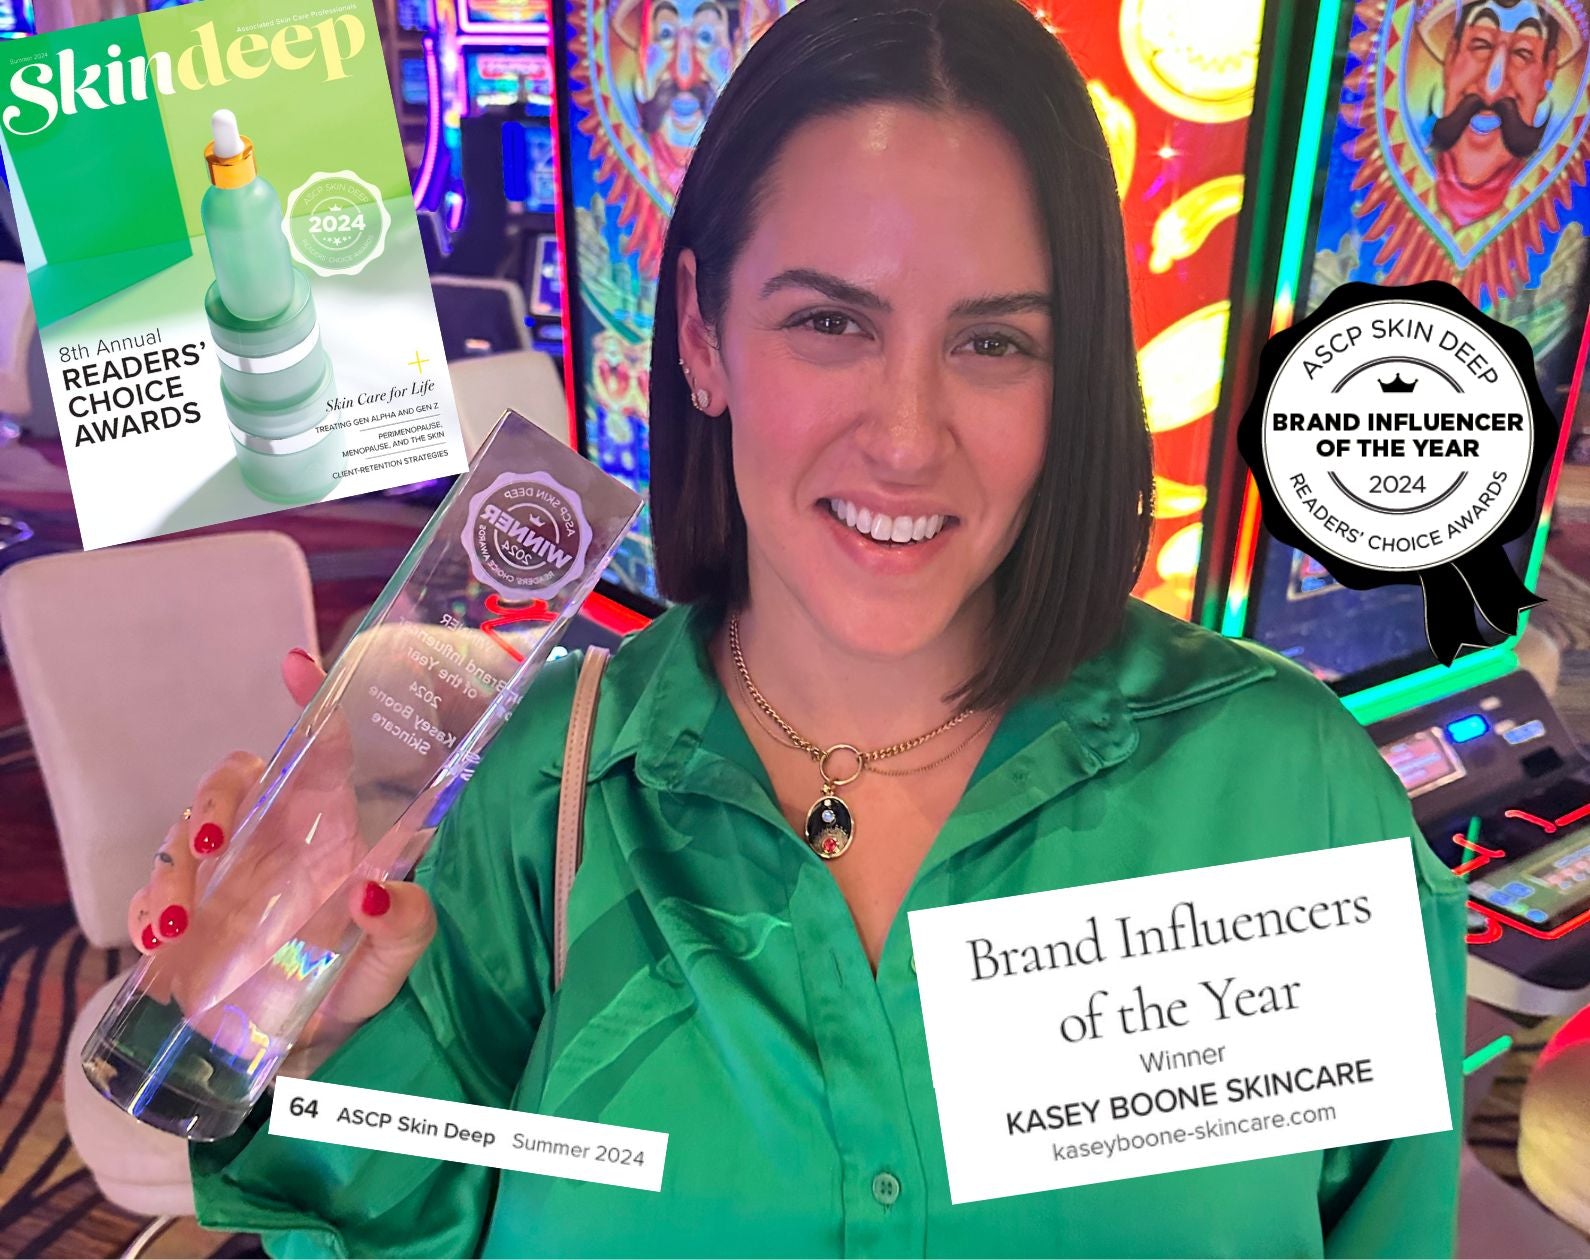 8th Annual Readers' Choice Awards Winner - Brand Influencer of the Year : Kasey Boone Skincare™